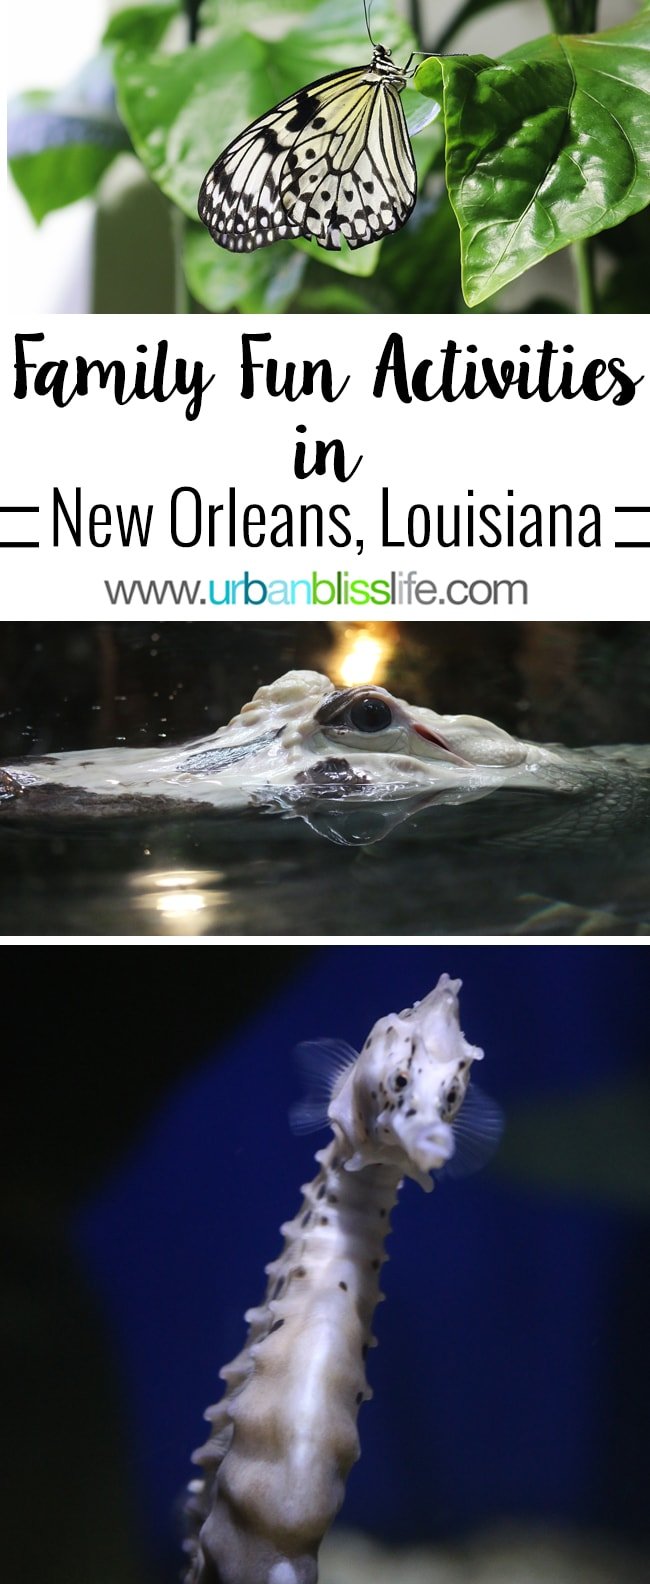 Family fun activities in New Orleans, Louisiana on UrbanBlissLife.com